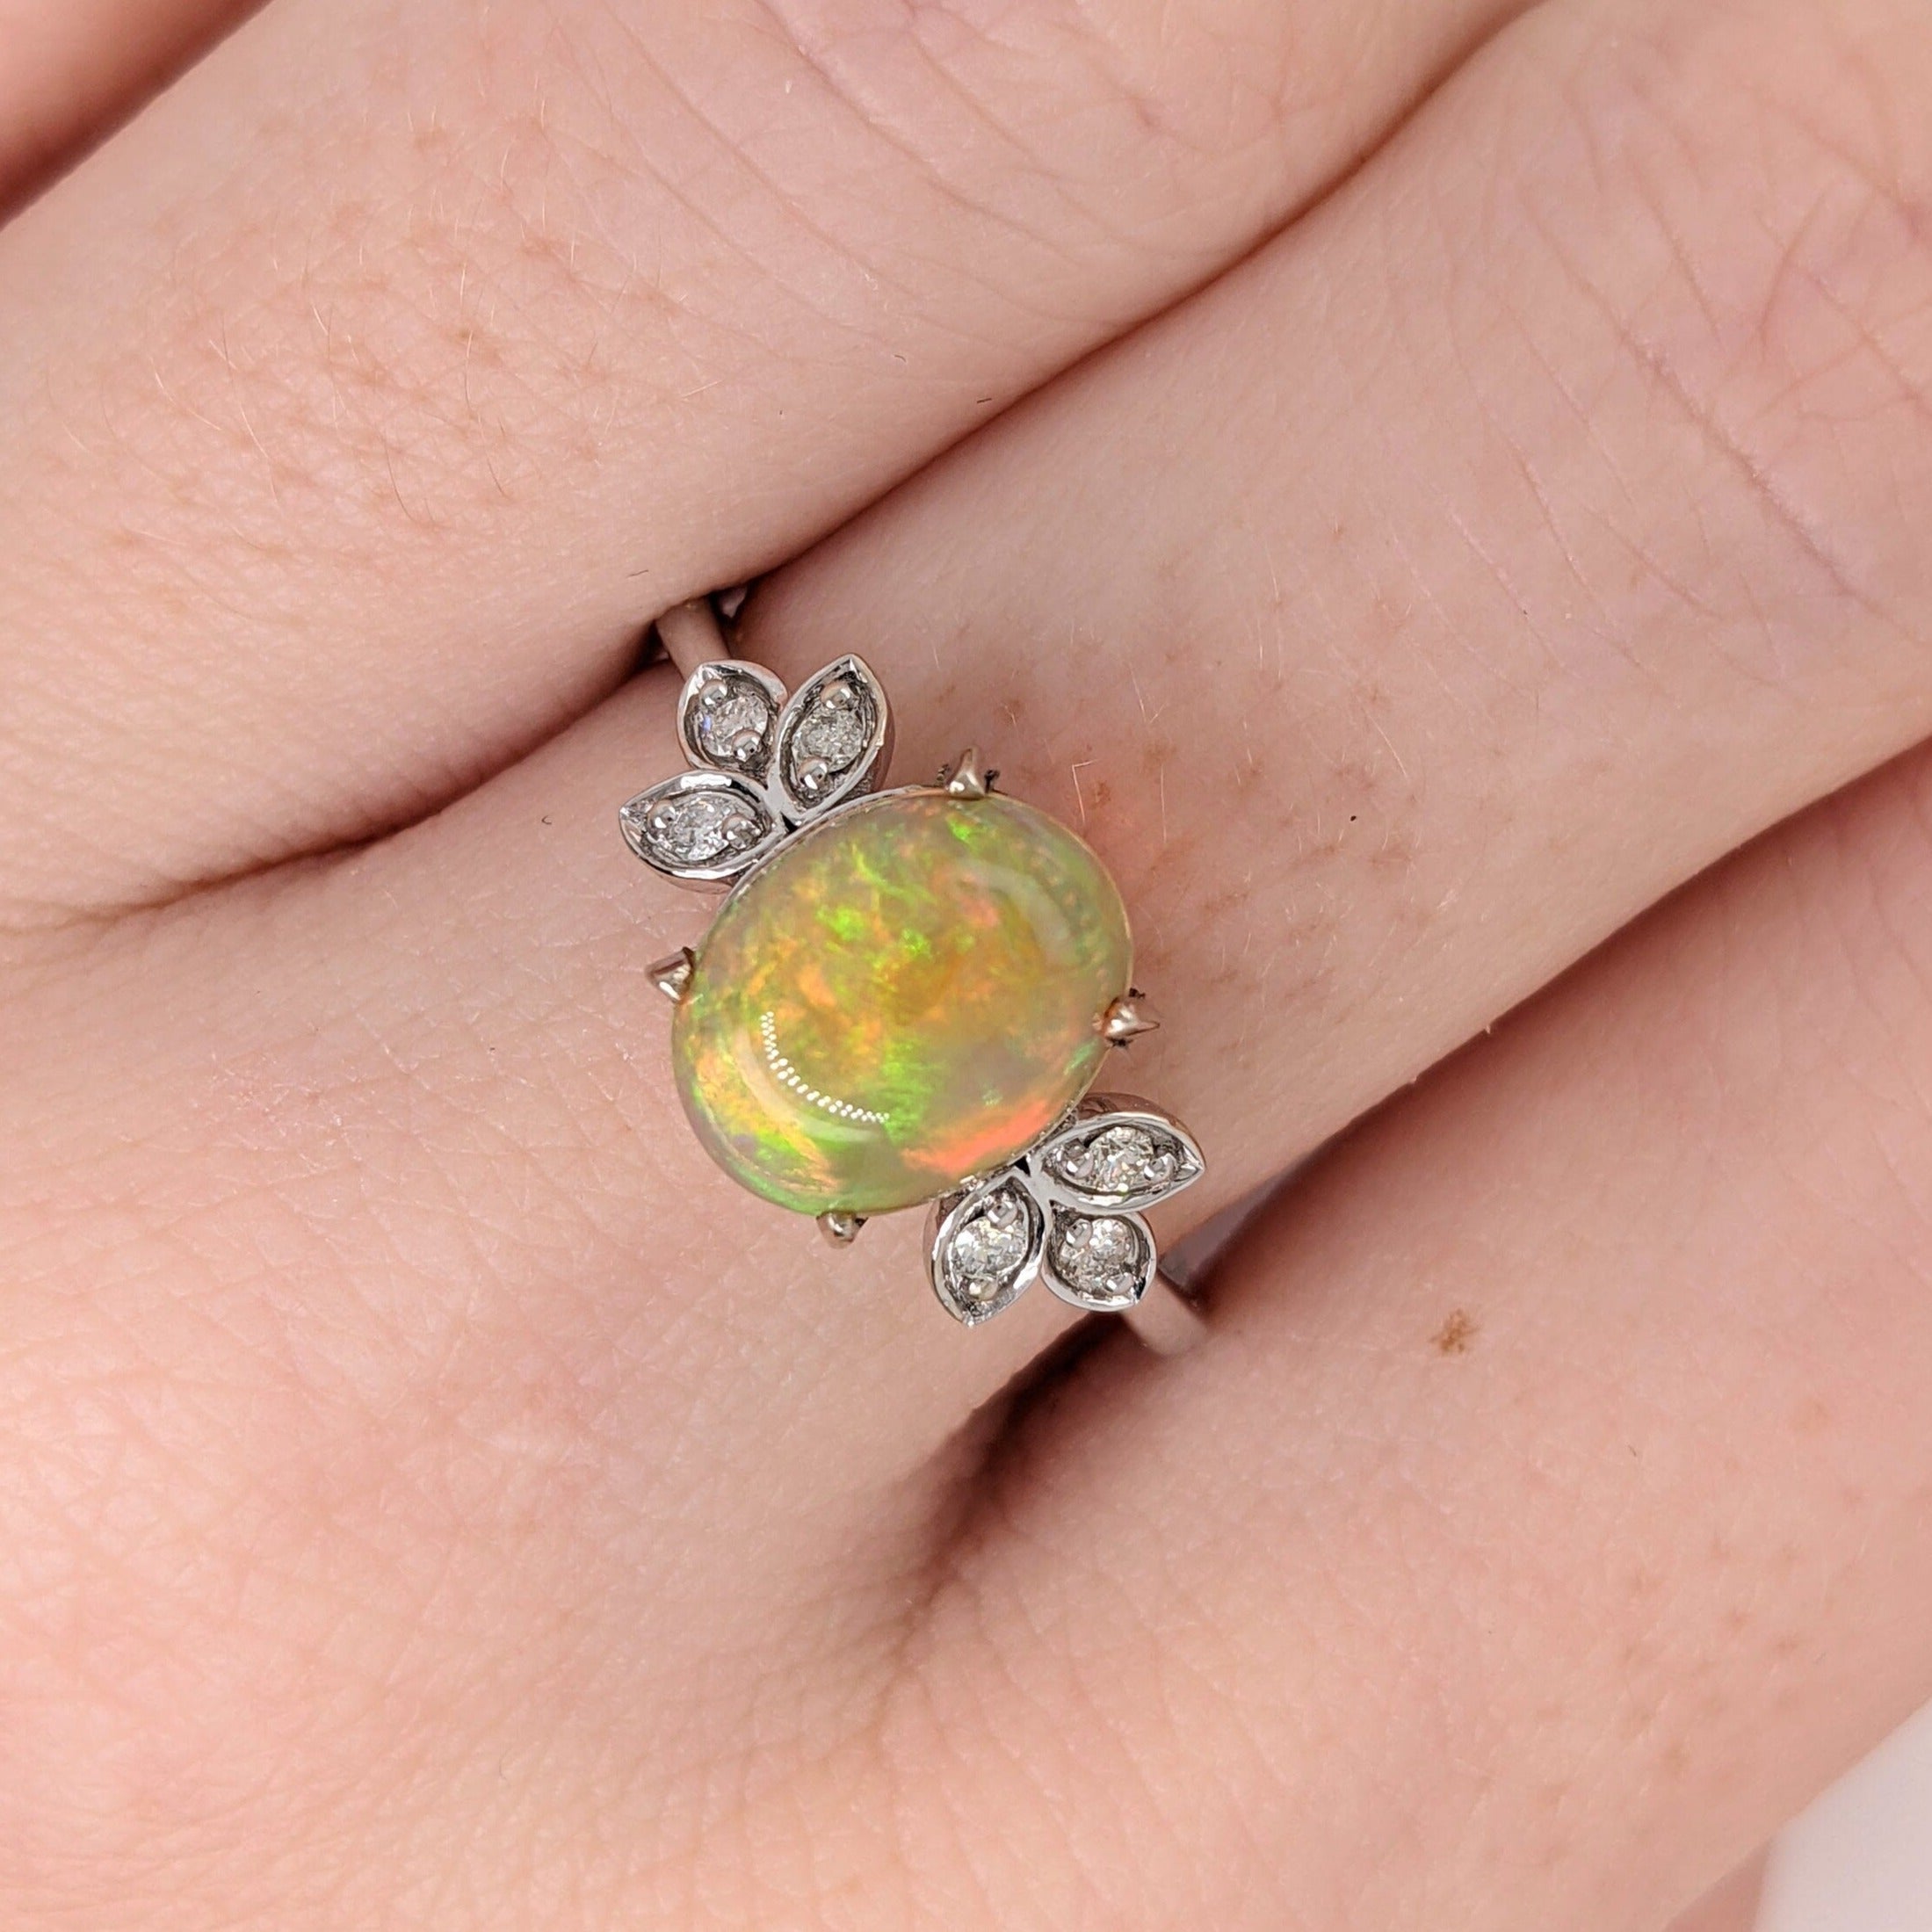 Fiery Opal Ring with Petal Diamond Accents in Solid 14k White Gold | Oval 9x7mm | Gemstone Jewelry | October Birthstone